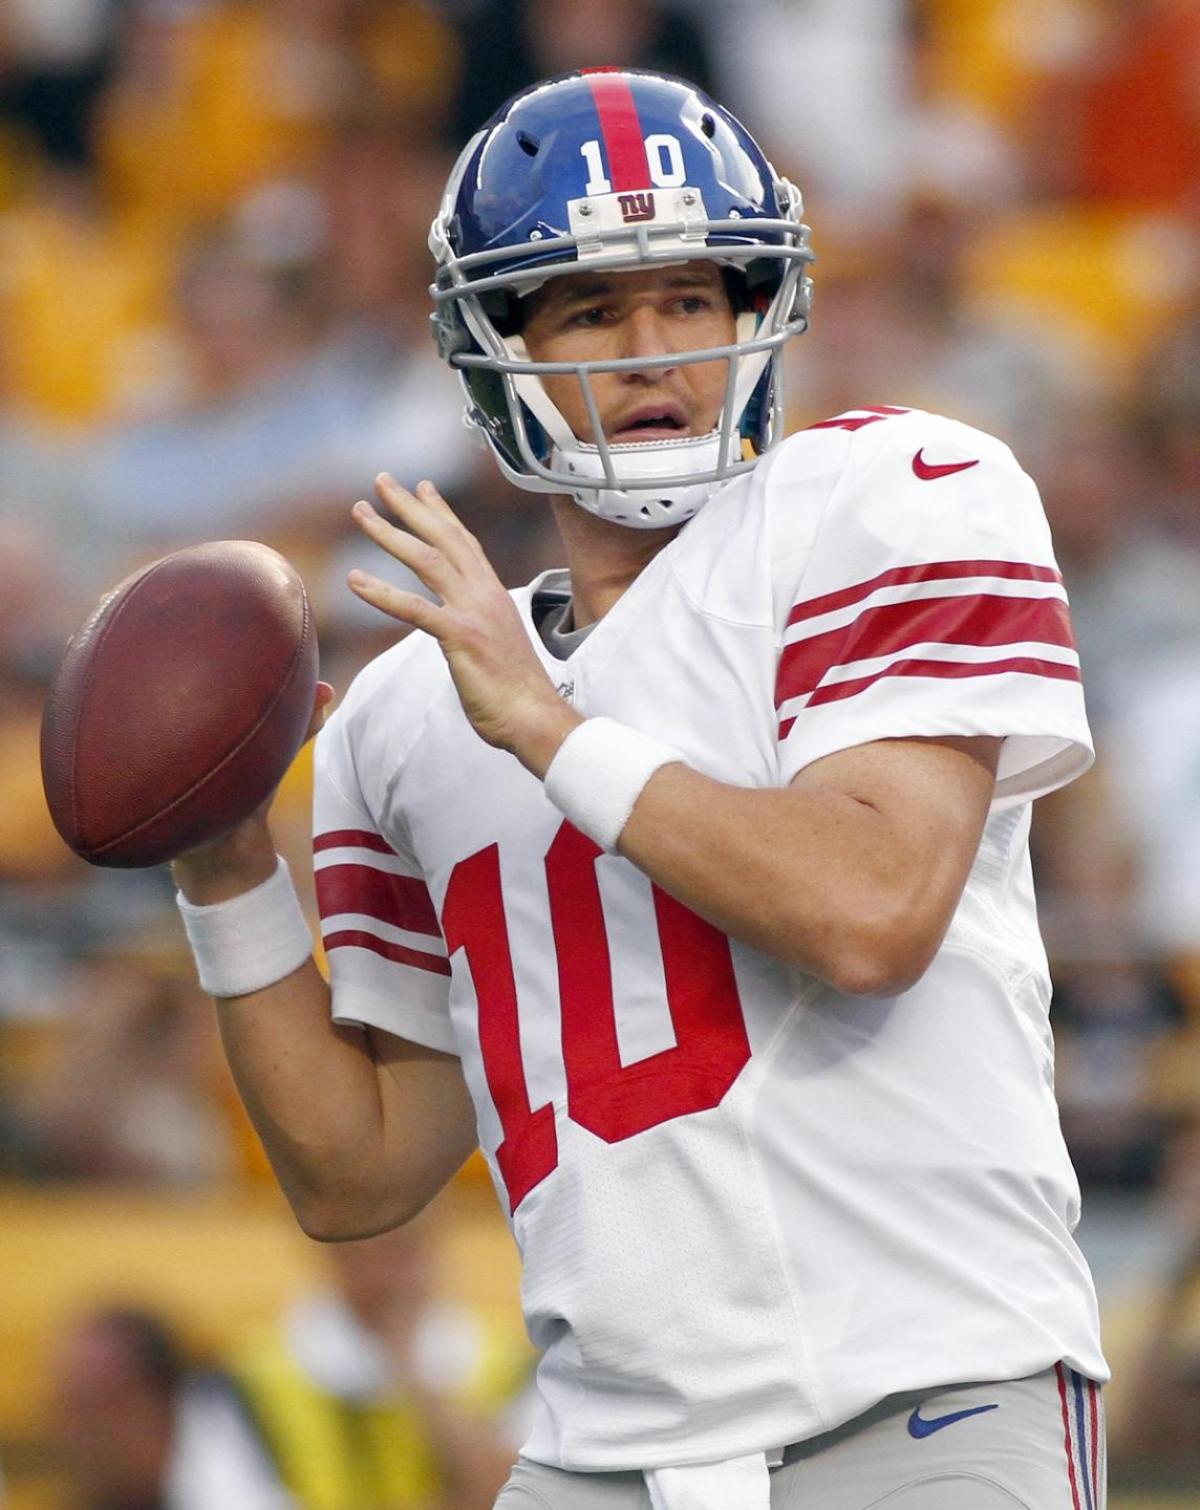 New York Giants quarterback Eli Manning, along with brother Peyton of the Denver Broncos, is one of the athletes represented by IMG.